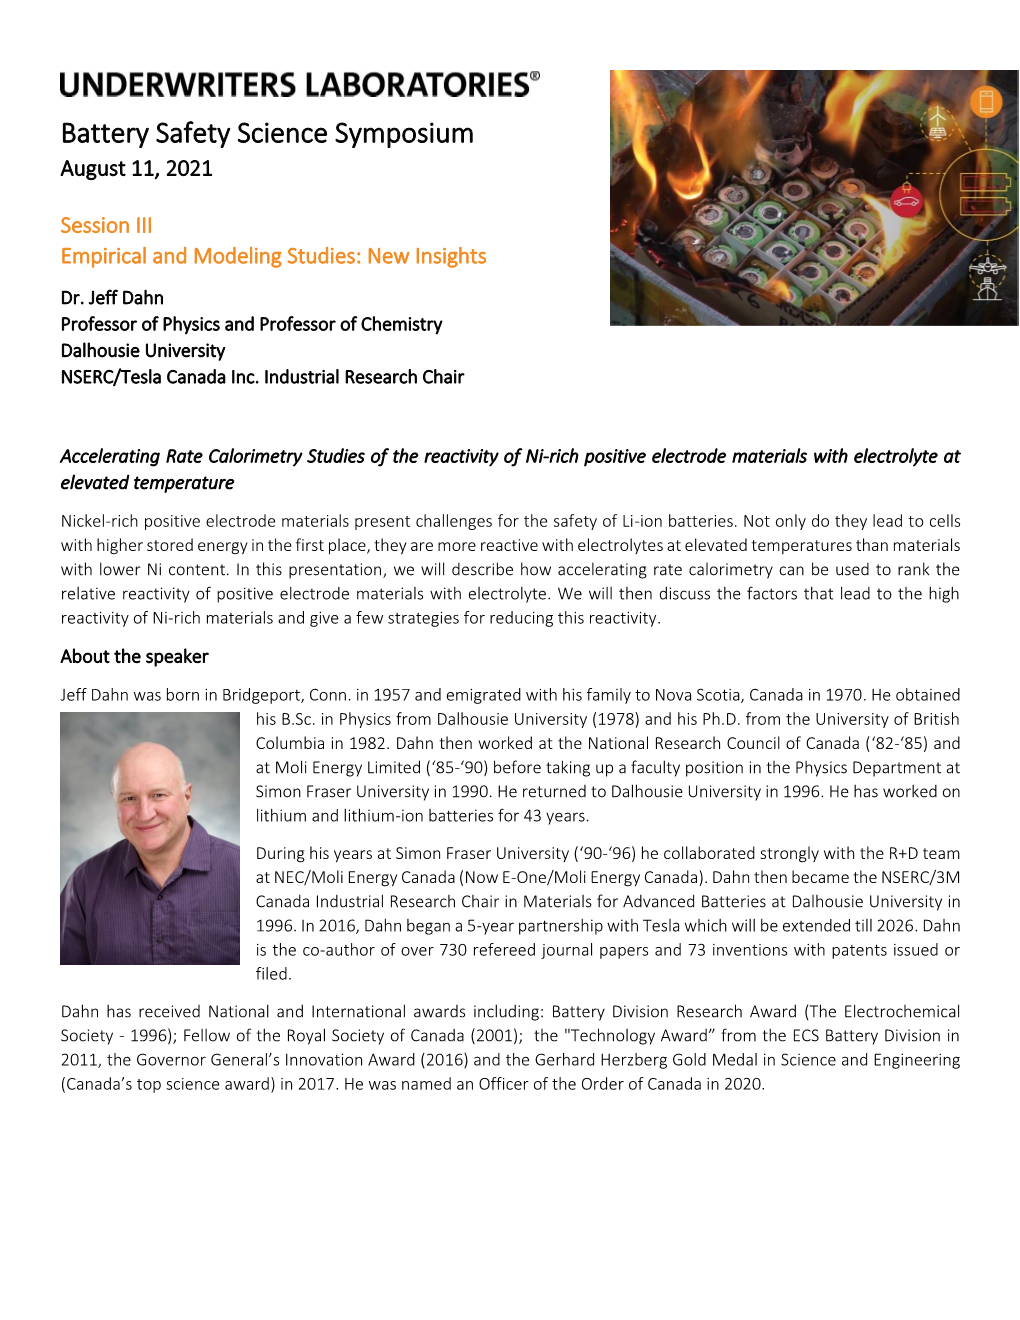 Battery Safety Science Symposium August 11, 2021